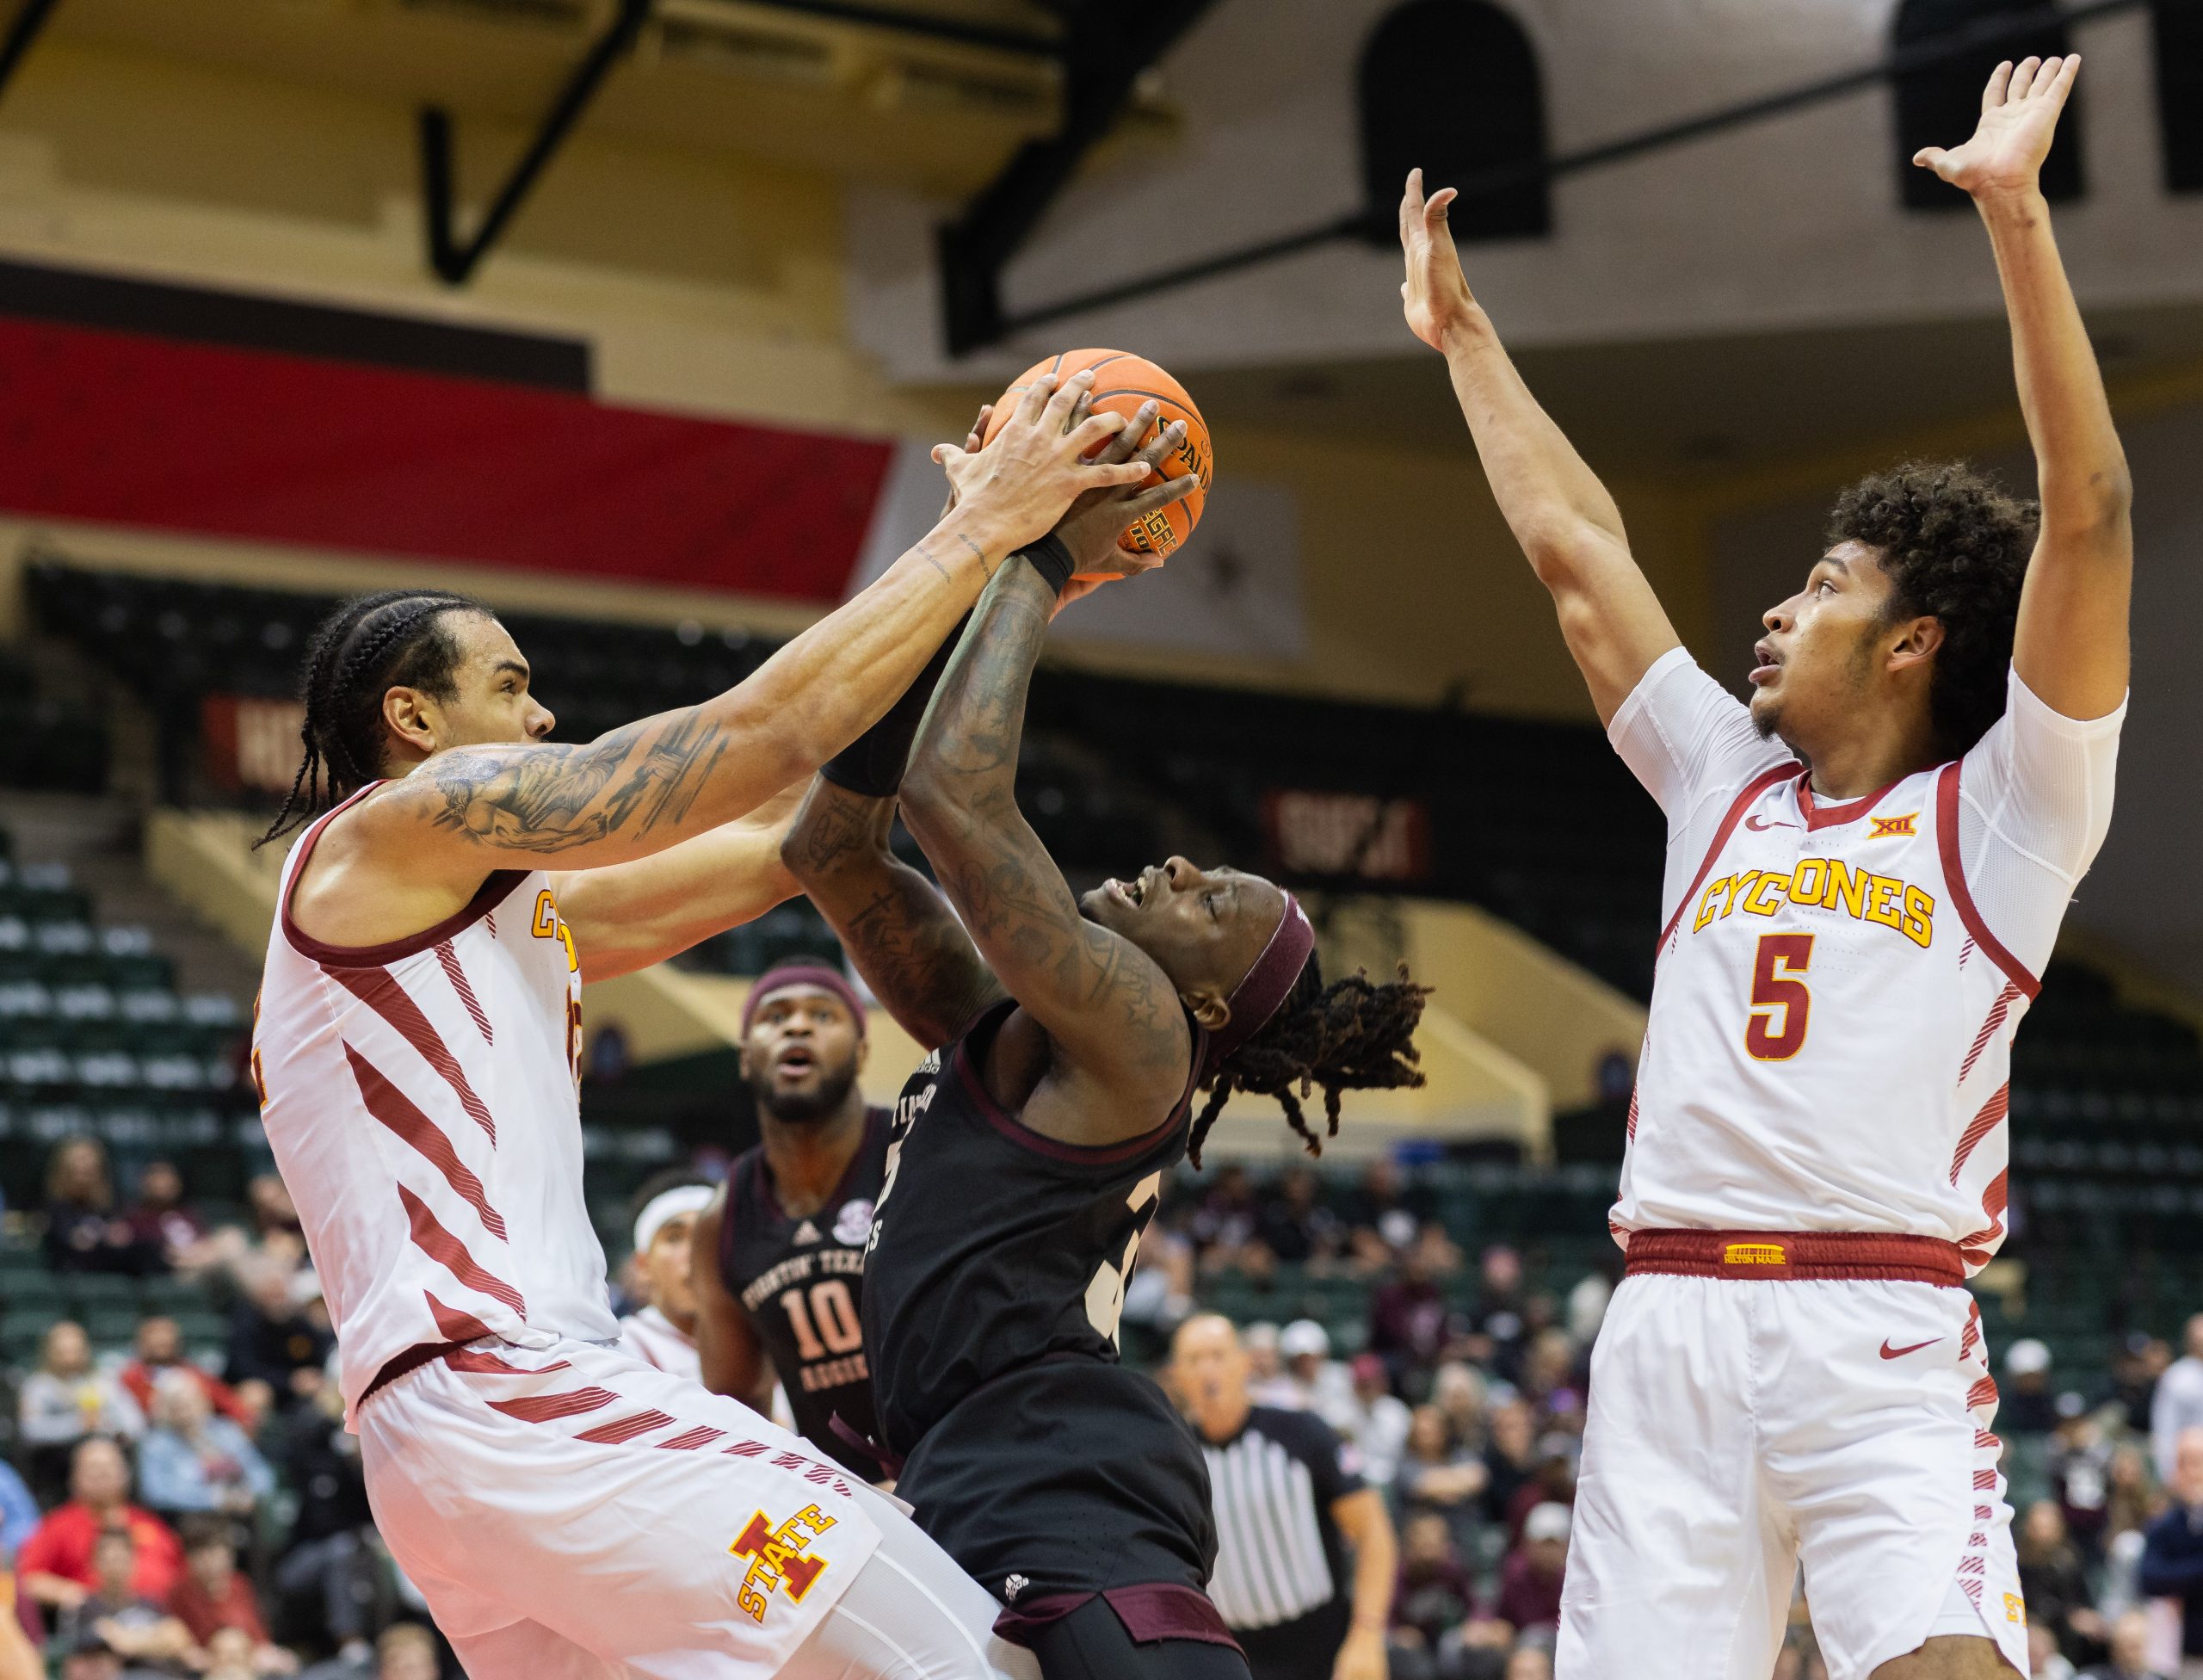 GALLERY%3A+Mens+Basketball+vs+Iowa+State